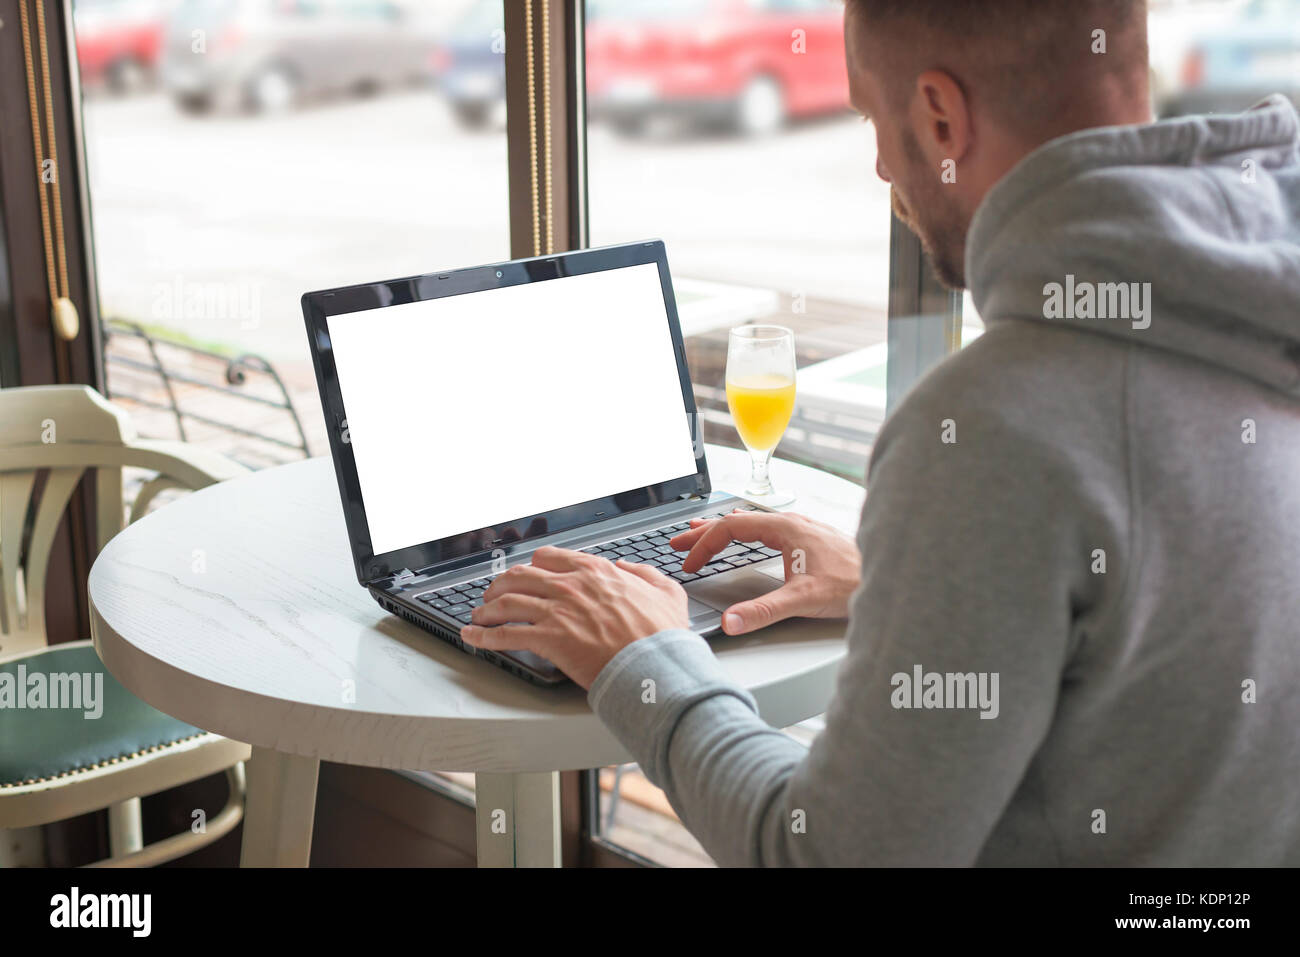 Man work on laptop in coffee shop. Isolated screen for app or web site mockup promotion. Stock Photo